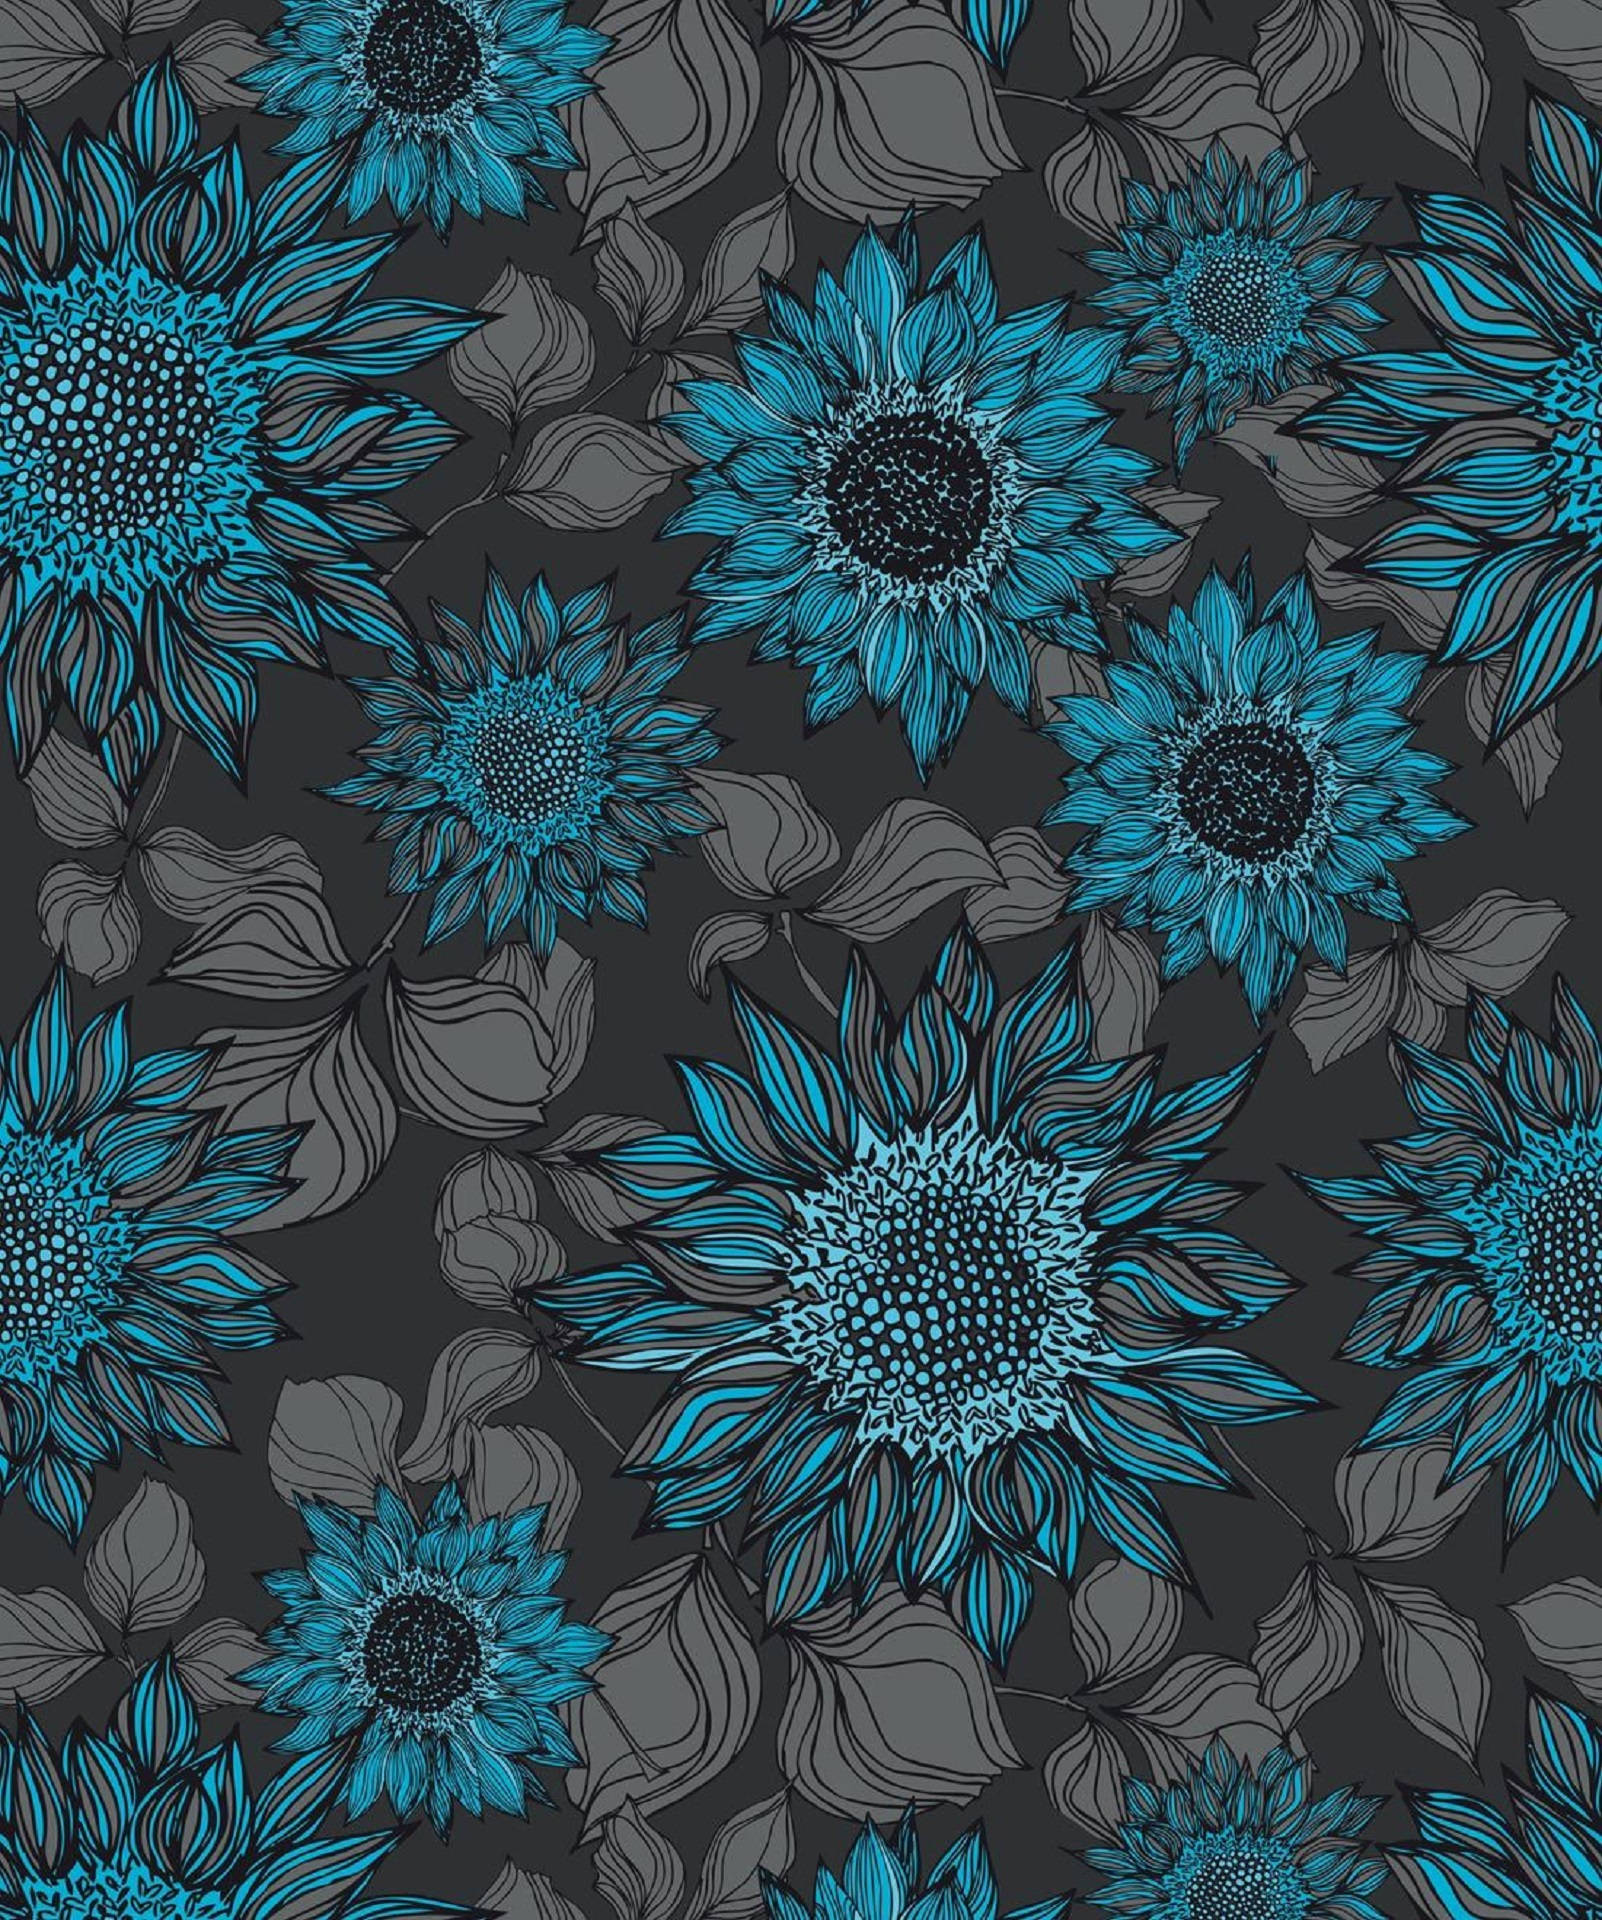 Whimsical Blue Flowers In Gray Background